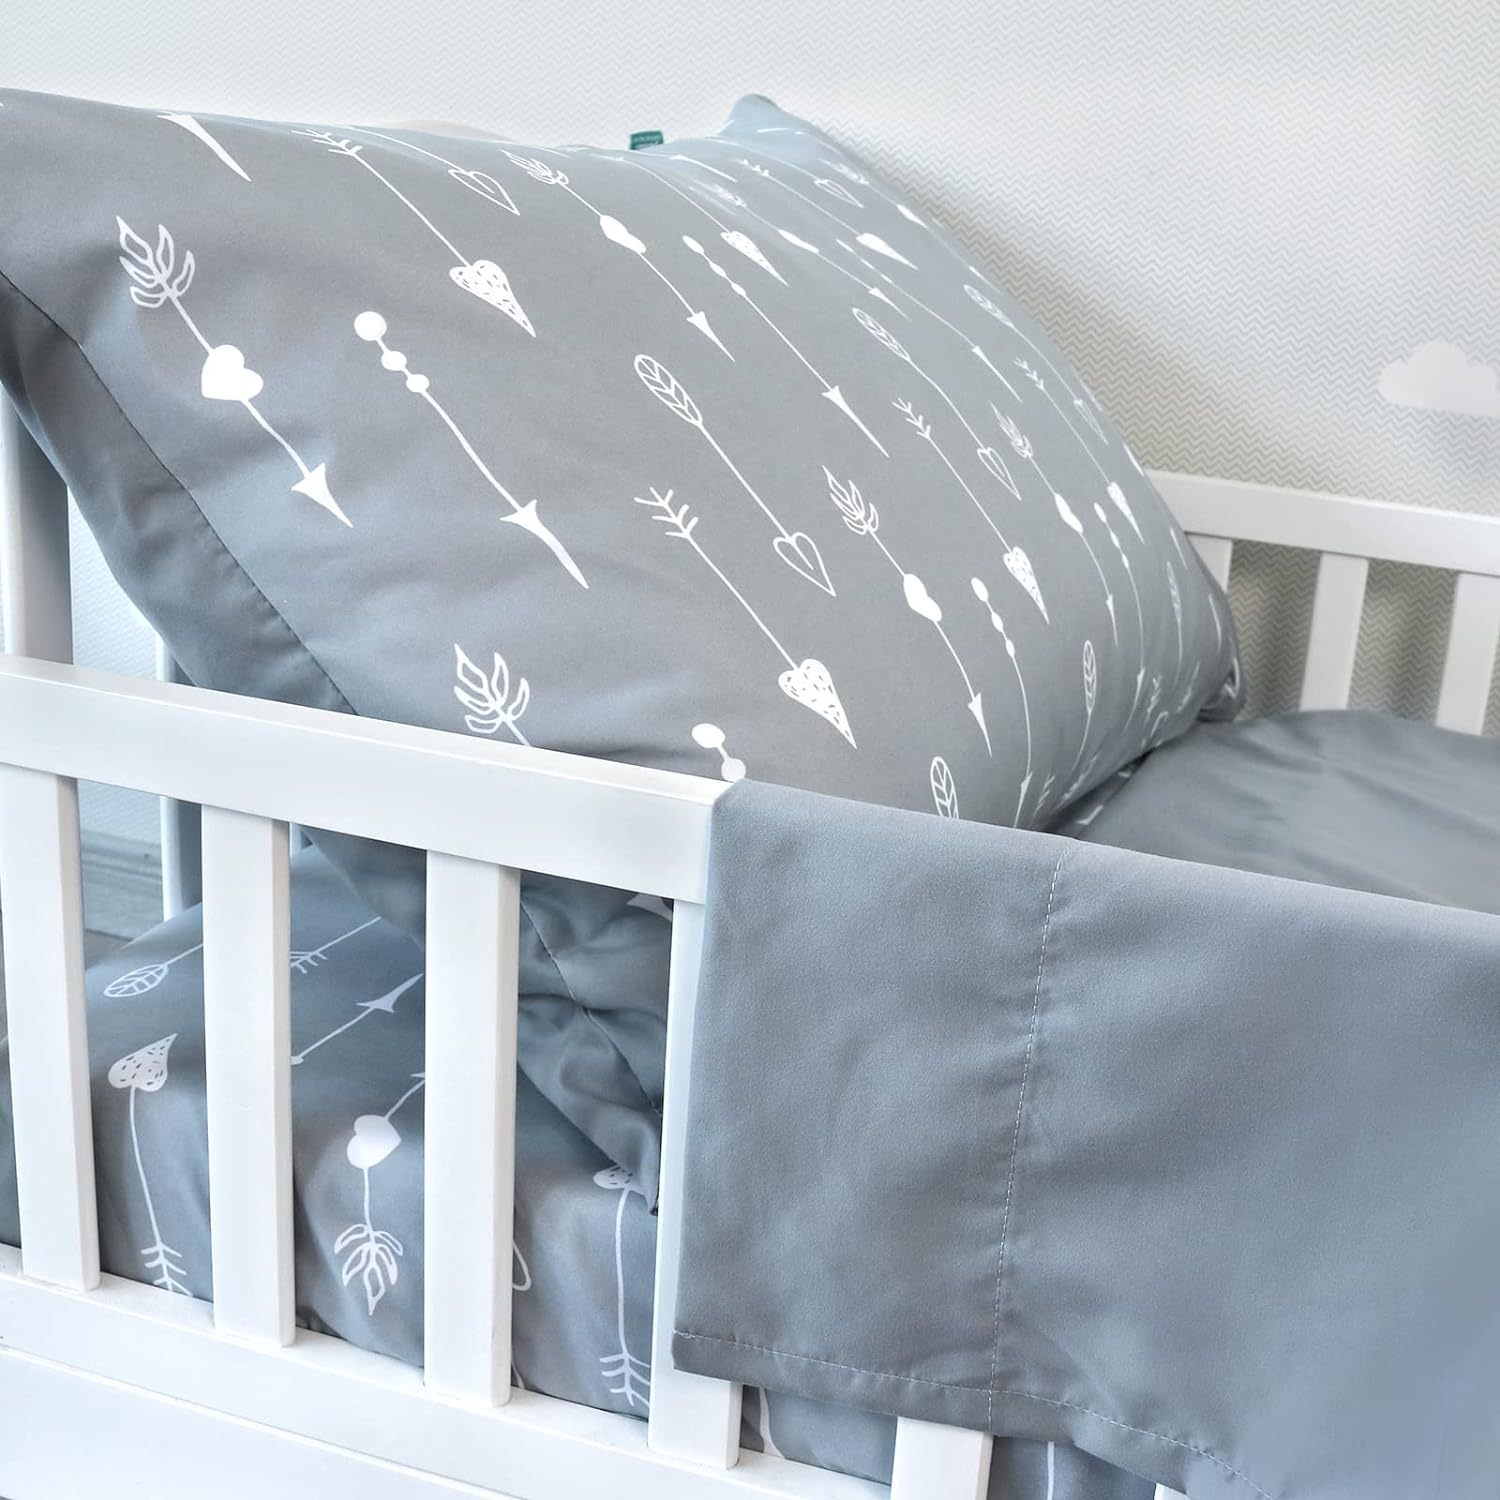 Toddler Bedding Set - 3 Pieces, Includes a Crib Fitted Sheet, Flat Sheet and Envelope Pillowcase, Soft and Breathable, Grey Arrow - Biloban Online Store